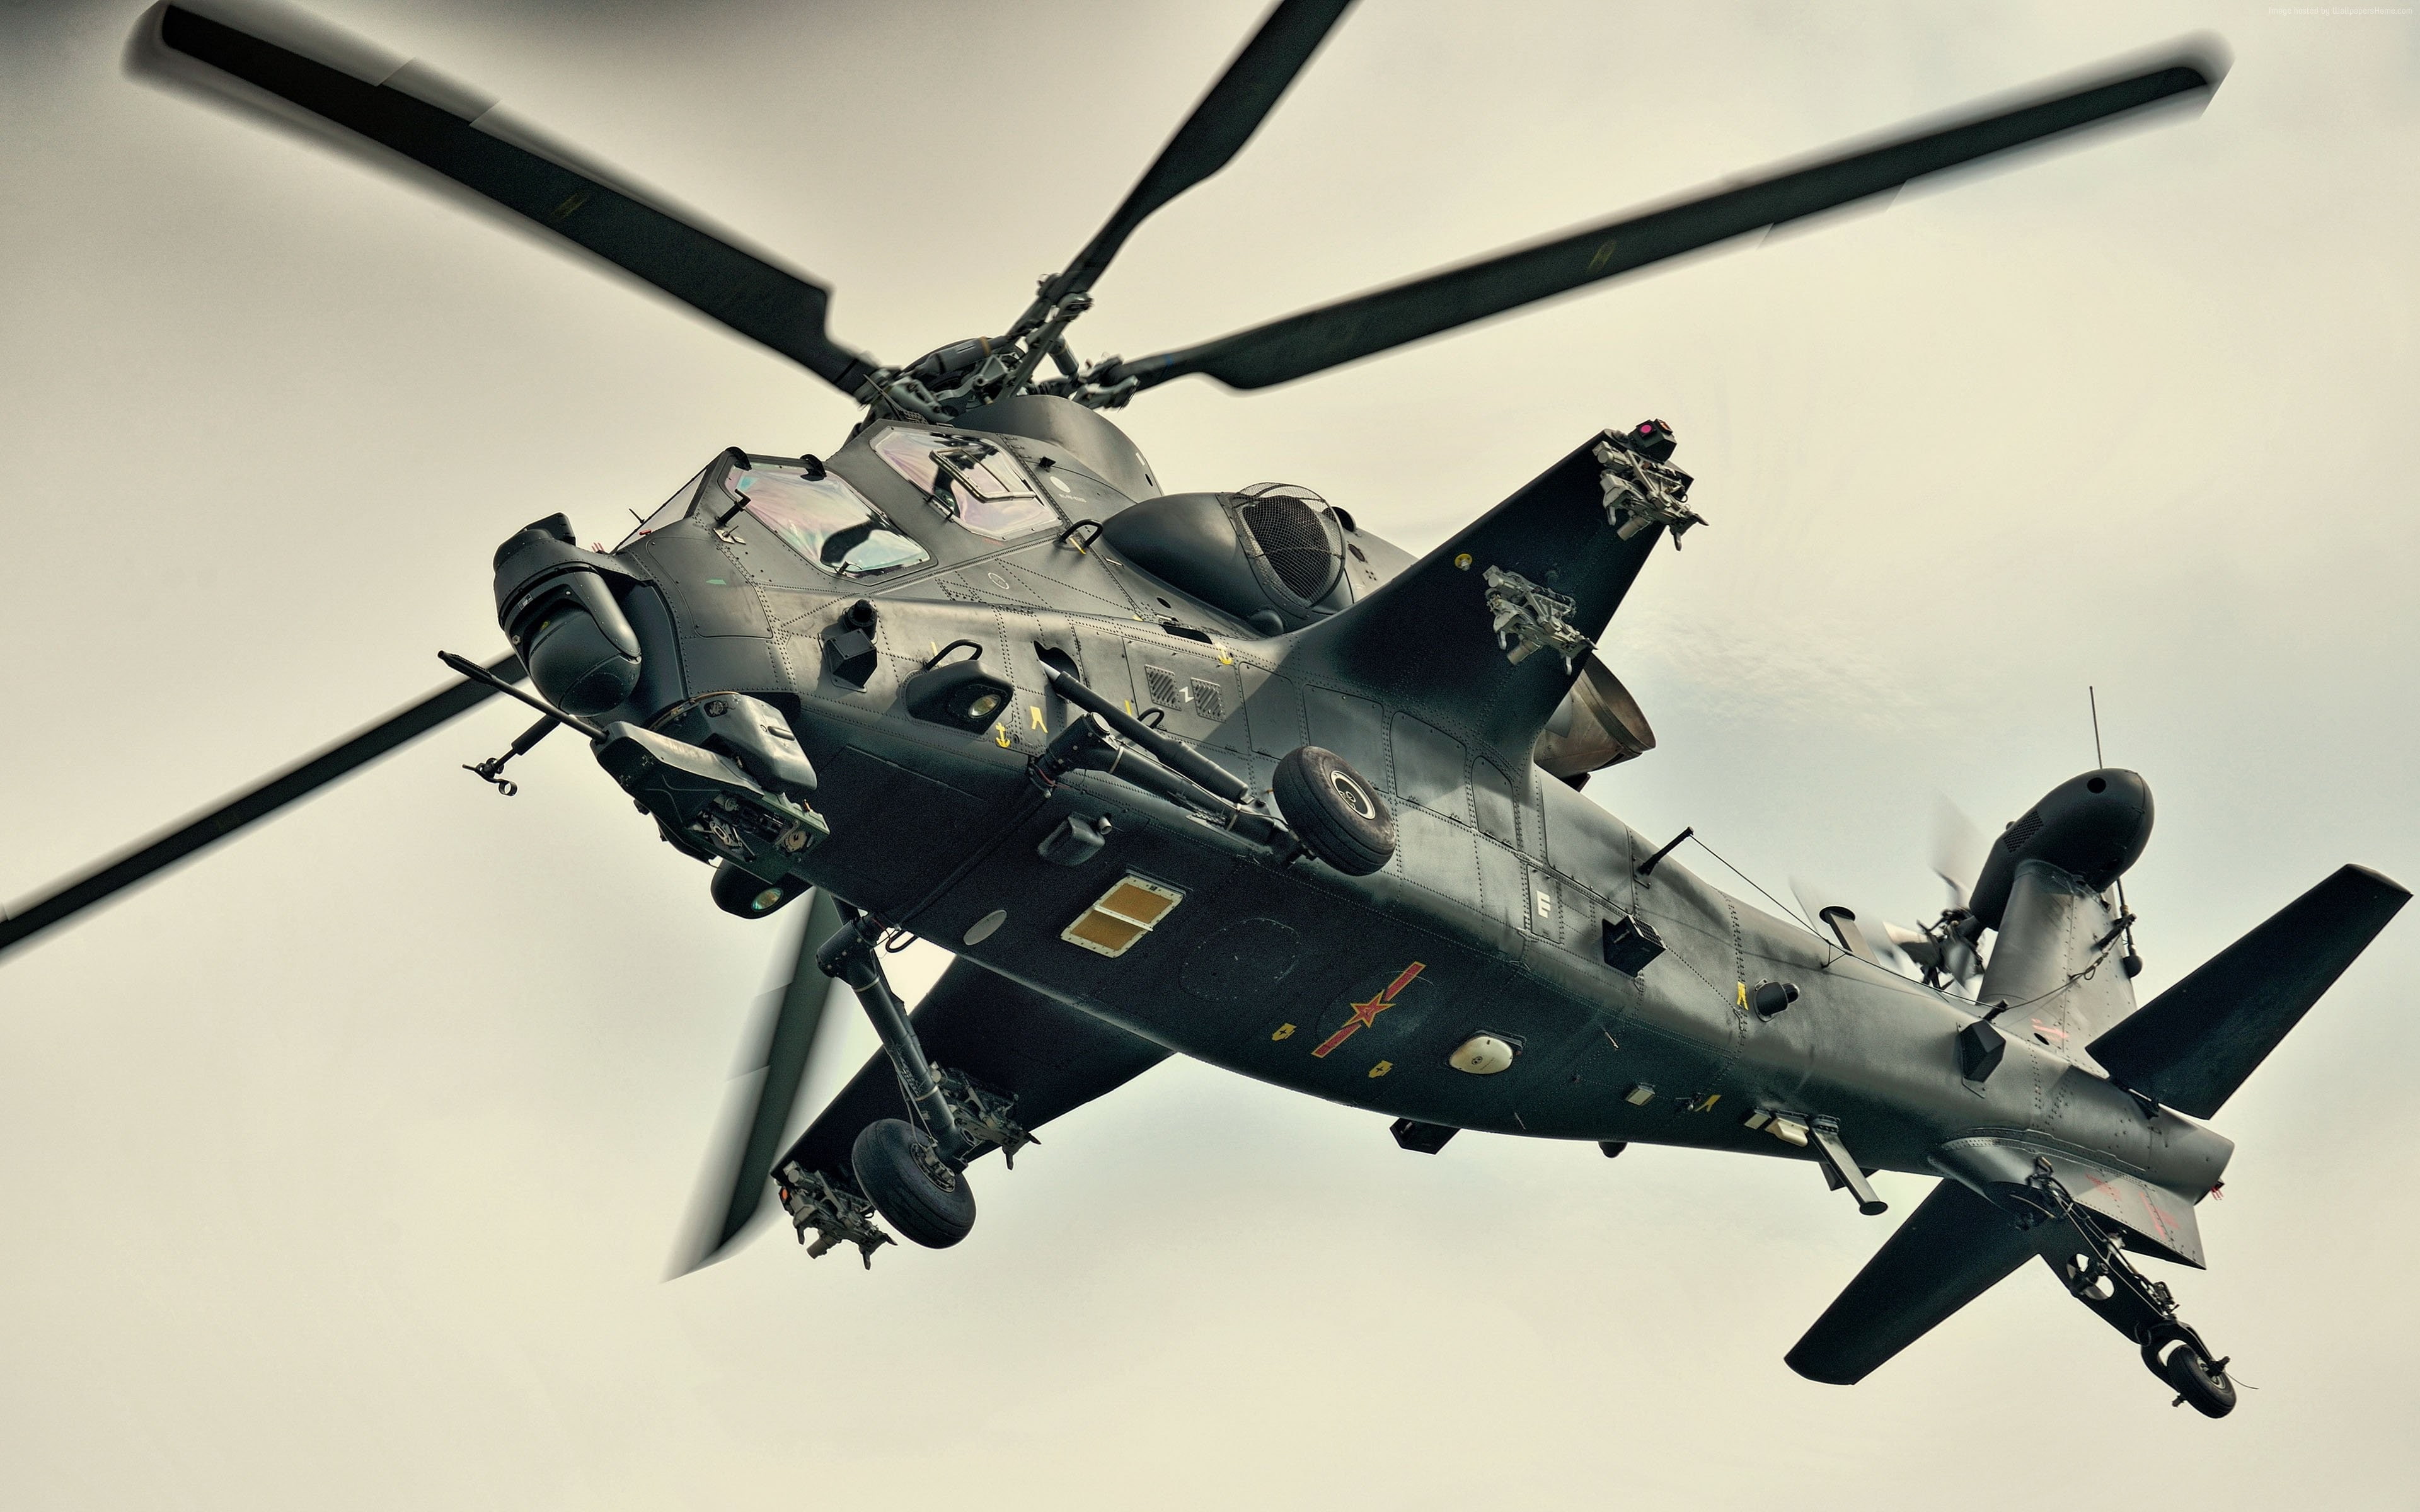 WZ-10, attack helicopter, Air Force, China Air Force, Fierce Thunderbolt